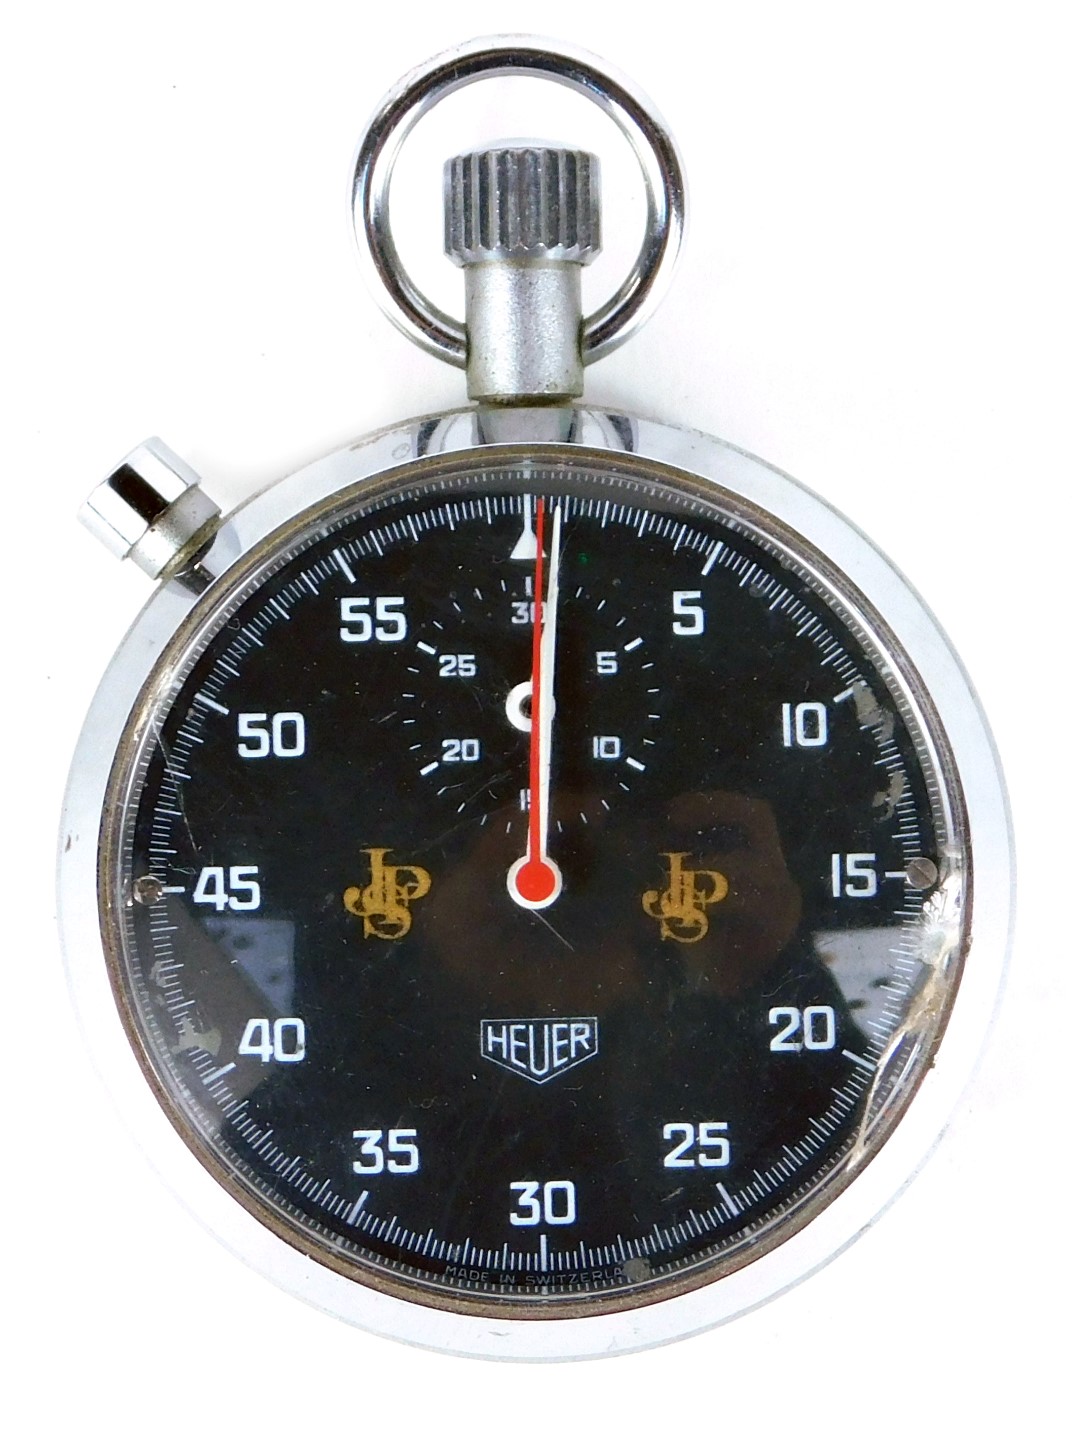 A Heuer for John Player Special lap timer, in a pro case with black dial.